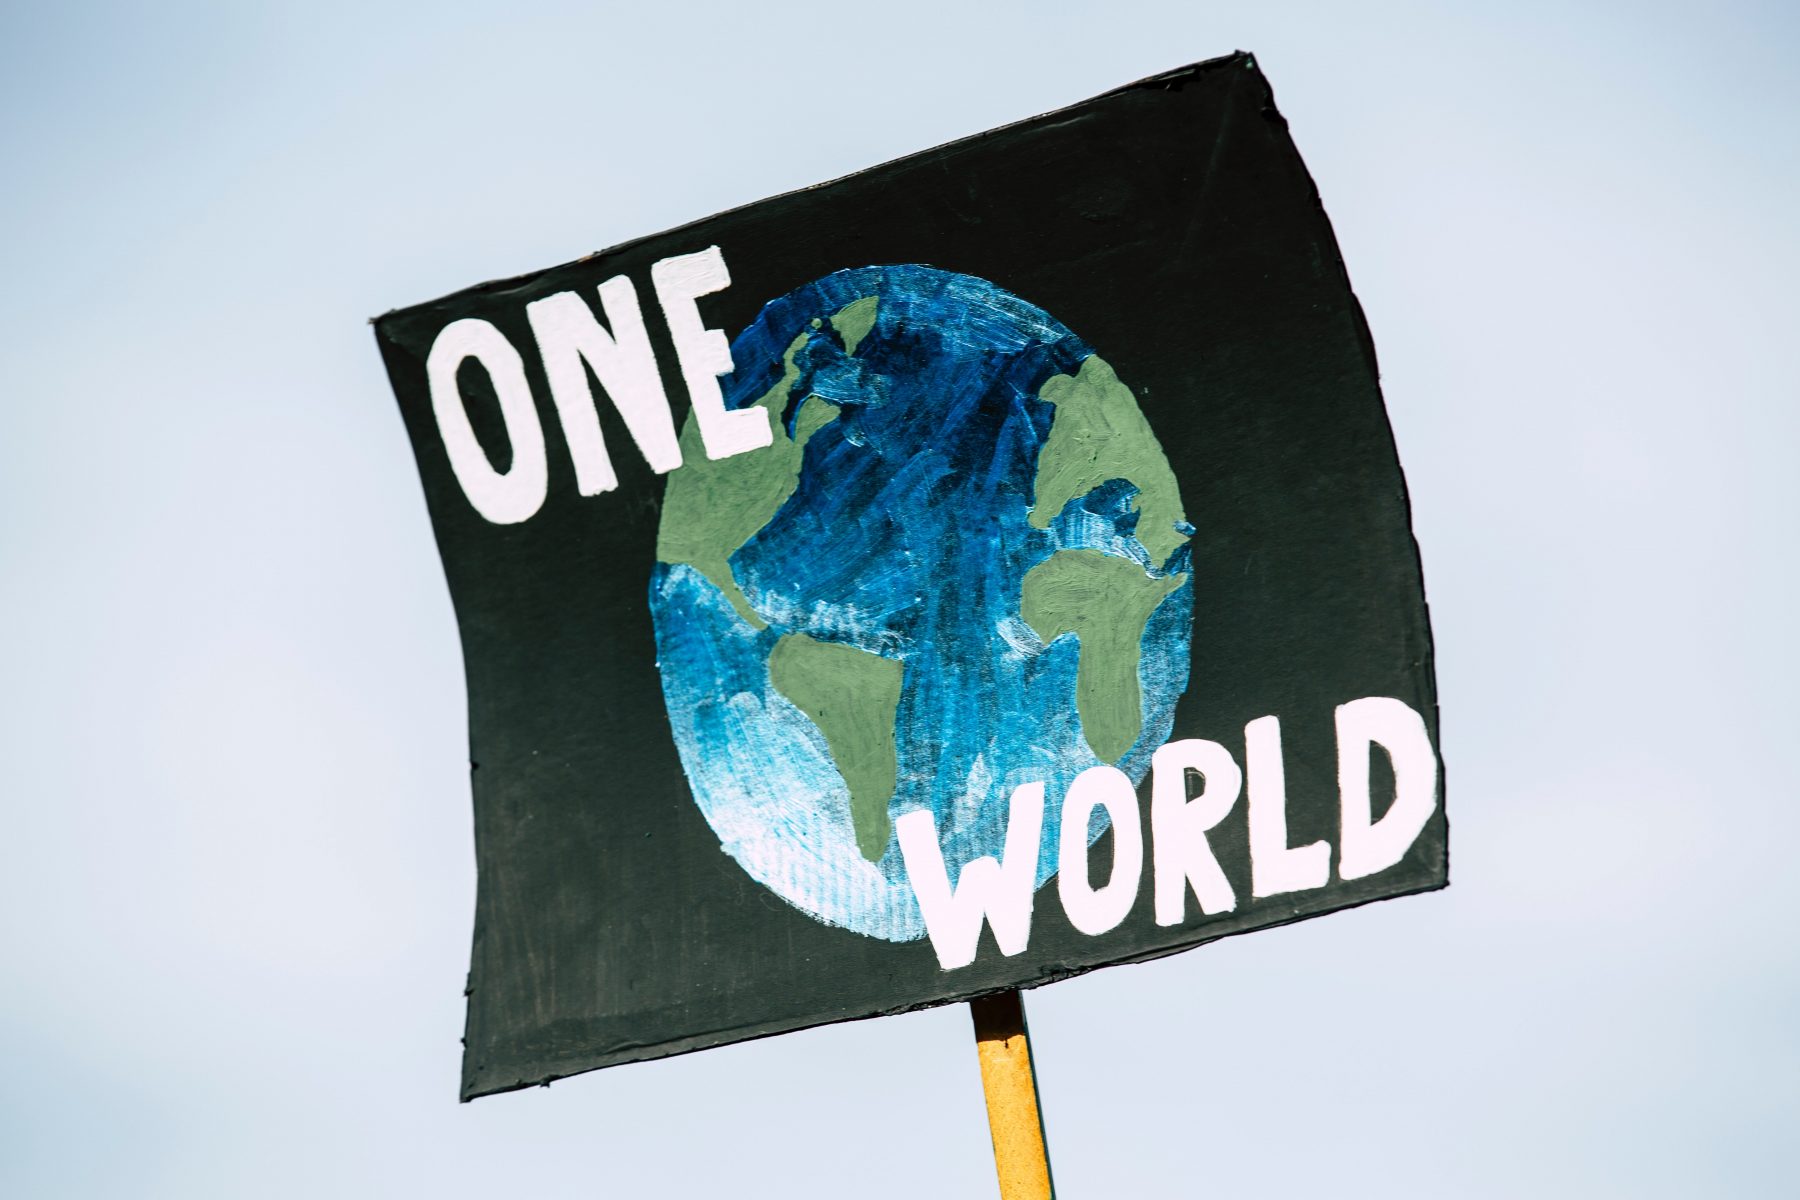 A placard at a climate protest that says "One World" with an image of the Earth in the background.